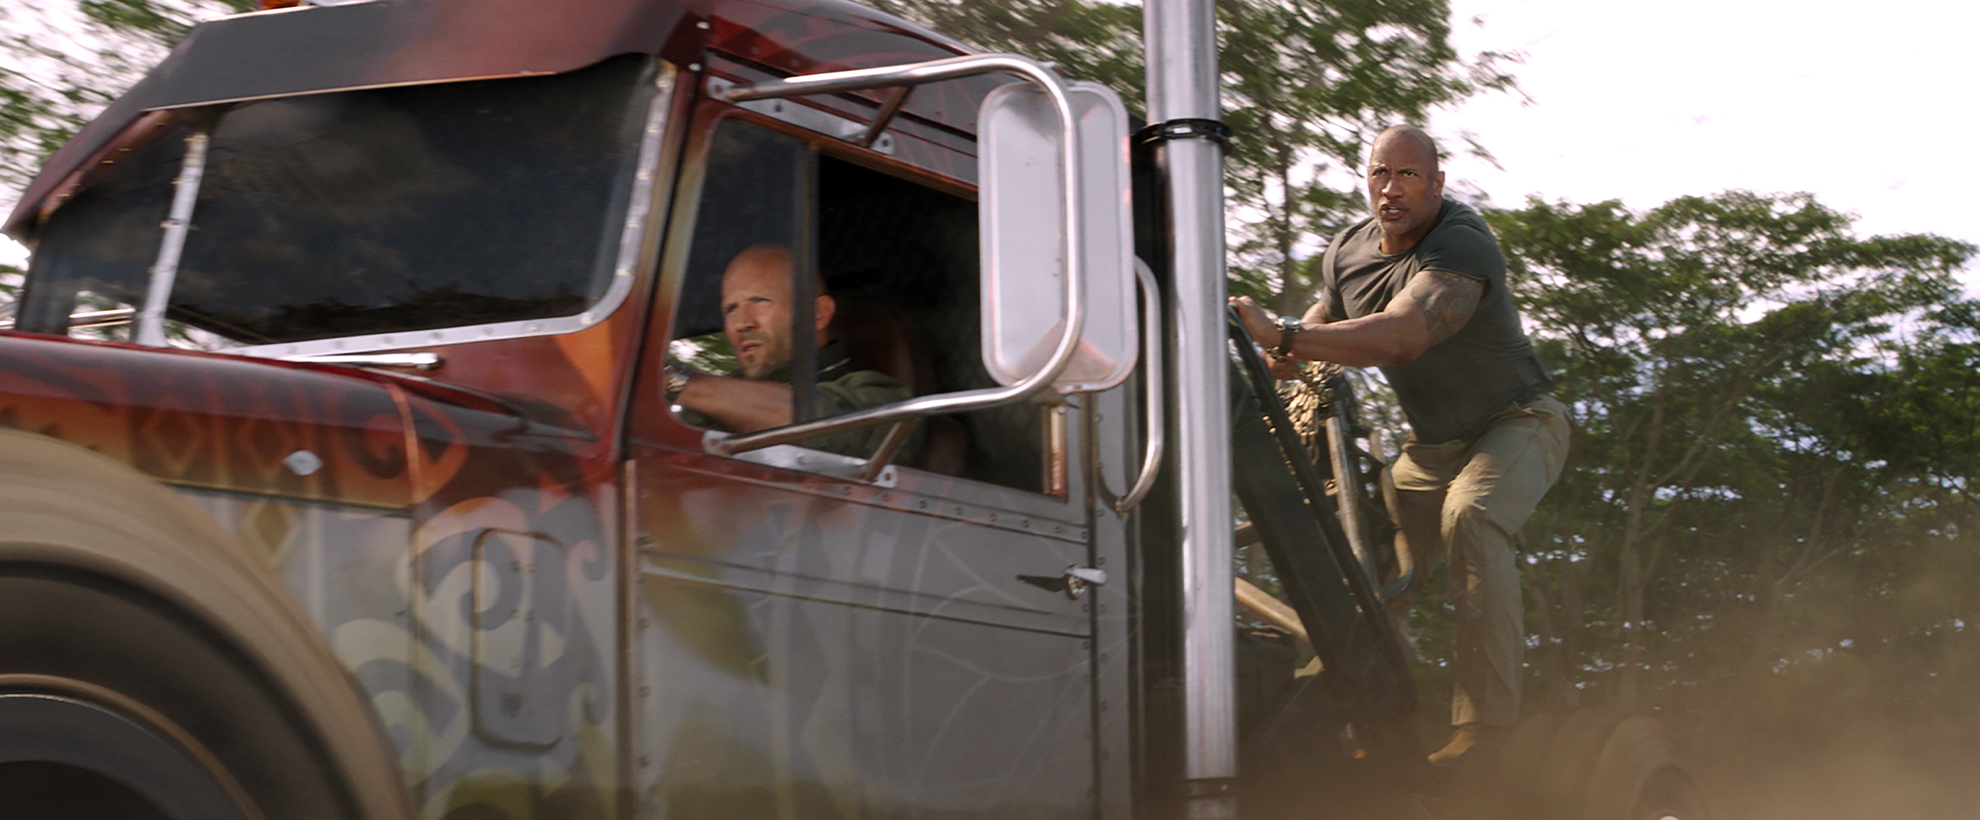 Jason Statham driving a large truck with Dwayne Johnson hanging on to the outside